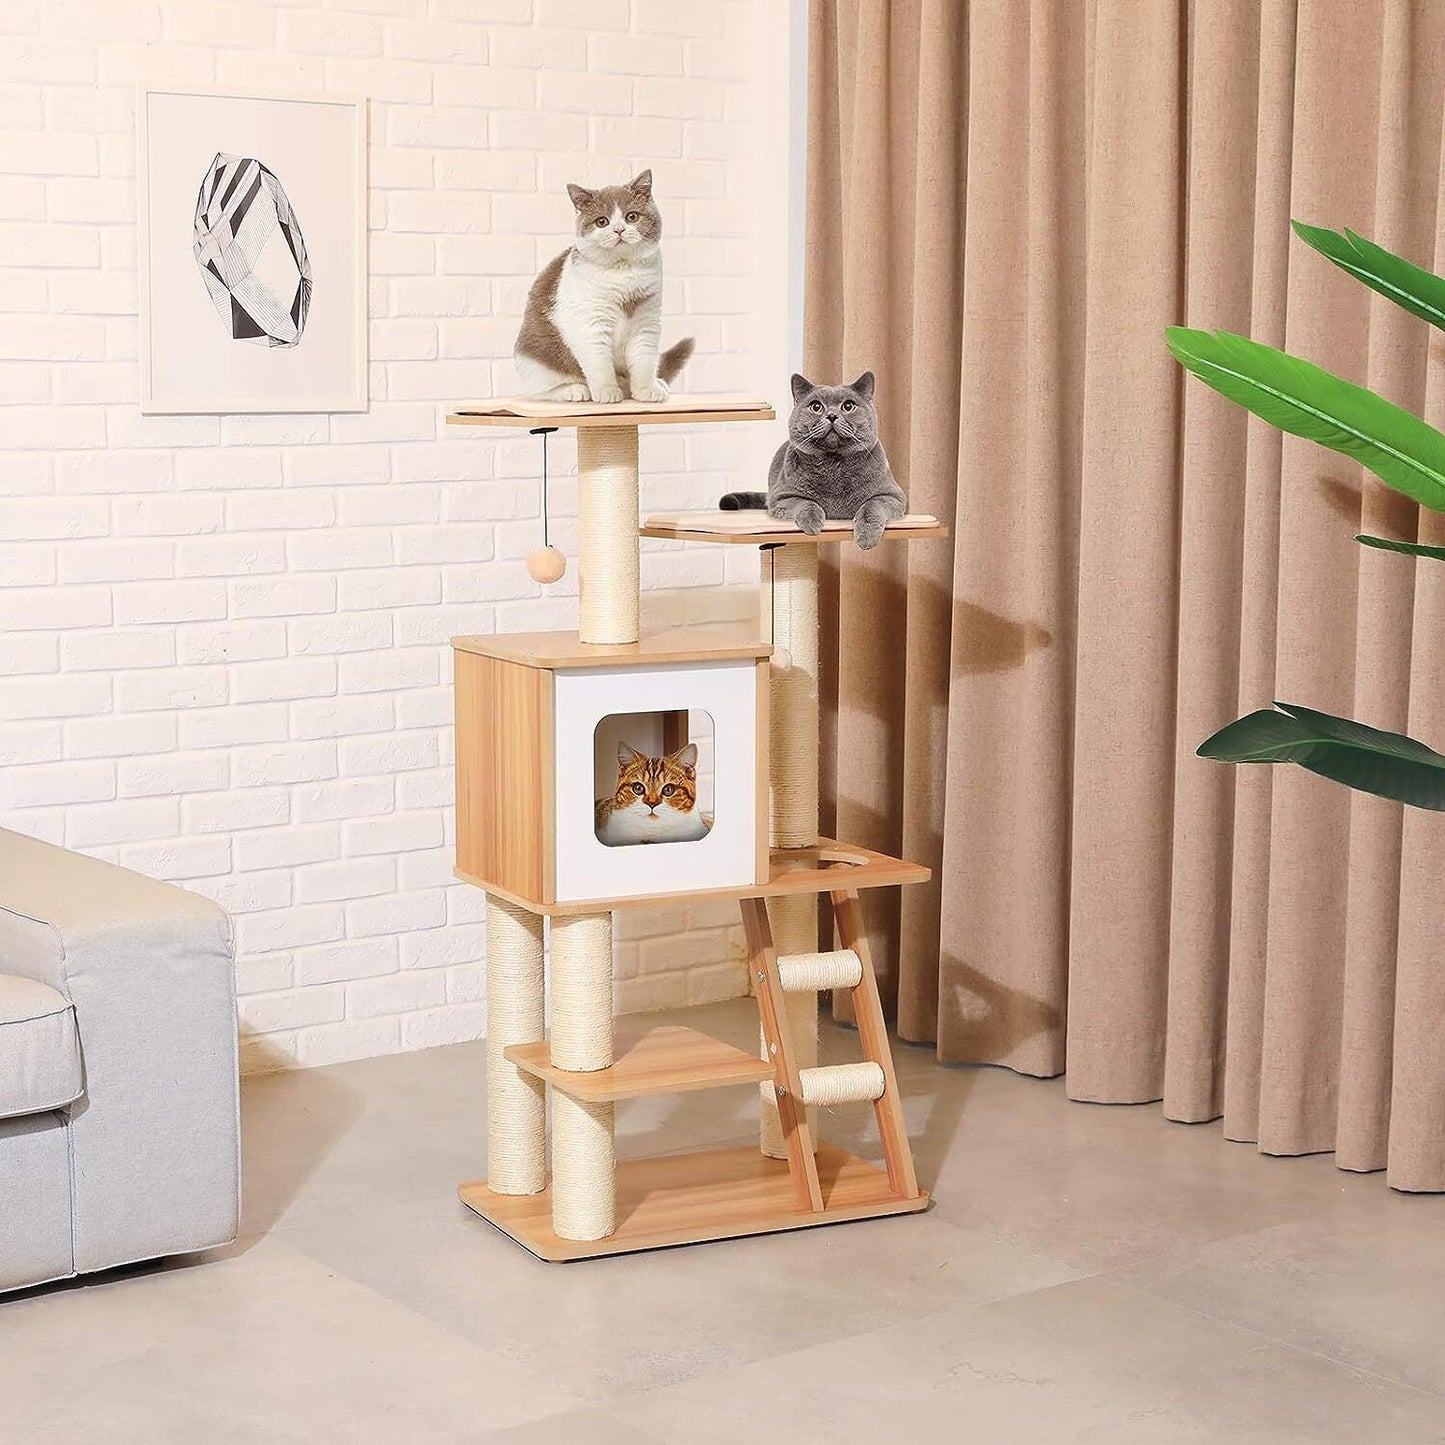 Arlopu 45" Wood Cat Tree Tower with Ladder, Modern Cat Condo Climbing Stand Indoor Activities Center with Sisal Scratching Post, Washable Plush Mats